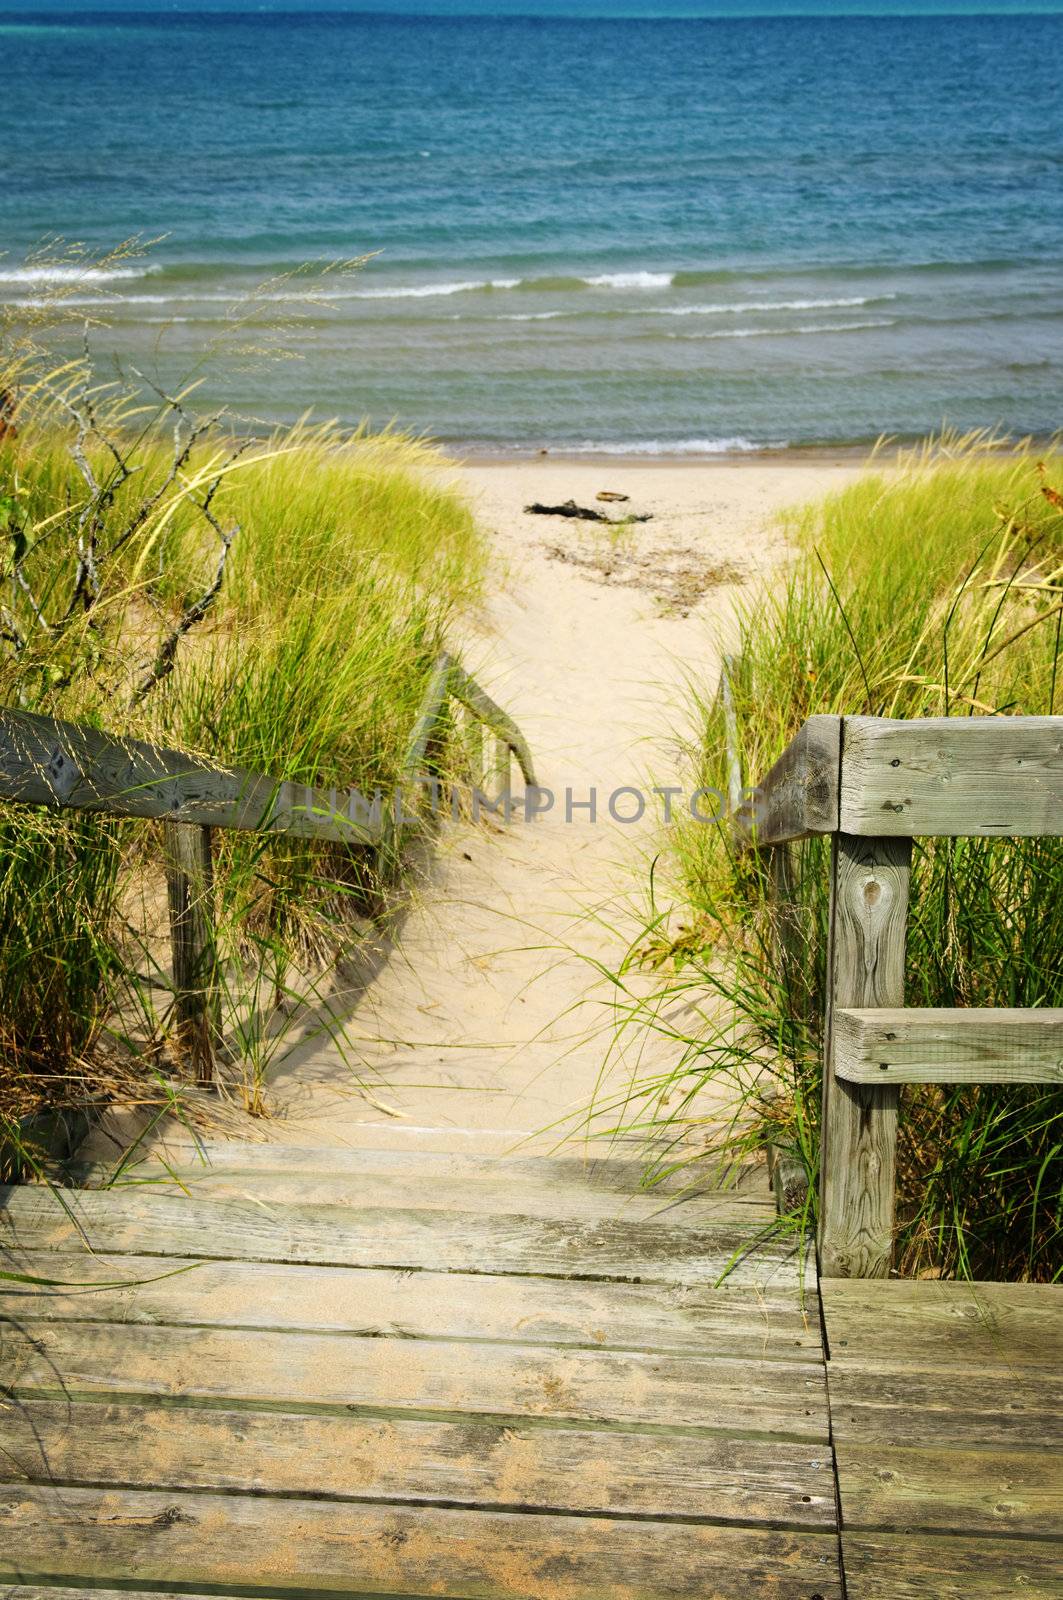 Wooden stairs over dunes at beach. Pinery provincial park, Ontario Canada